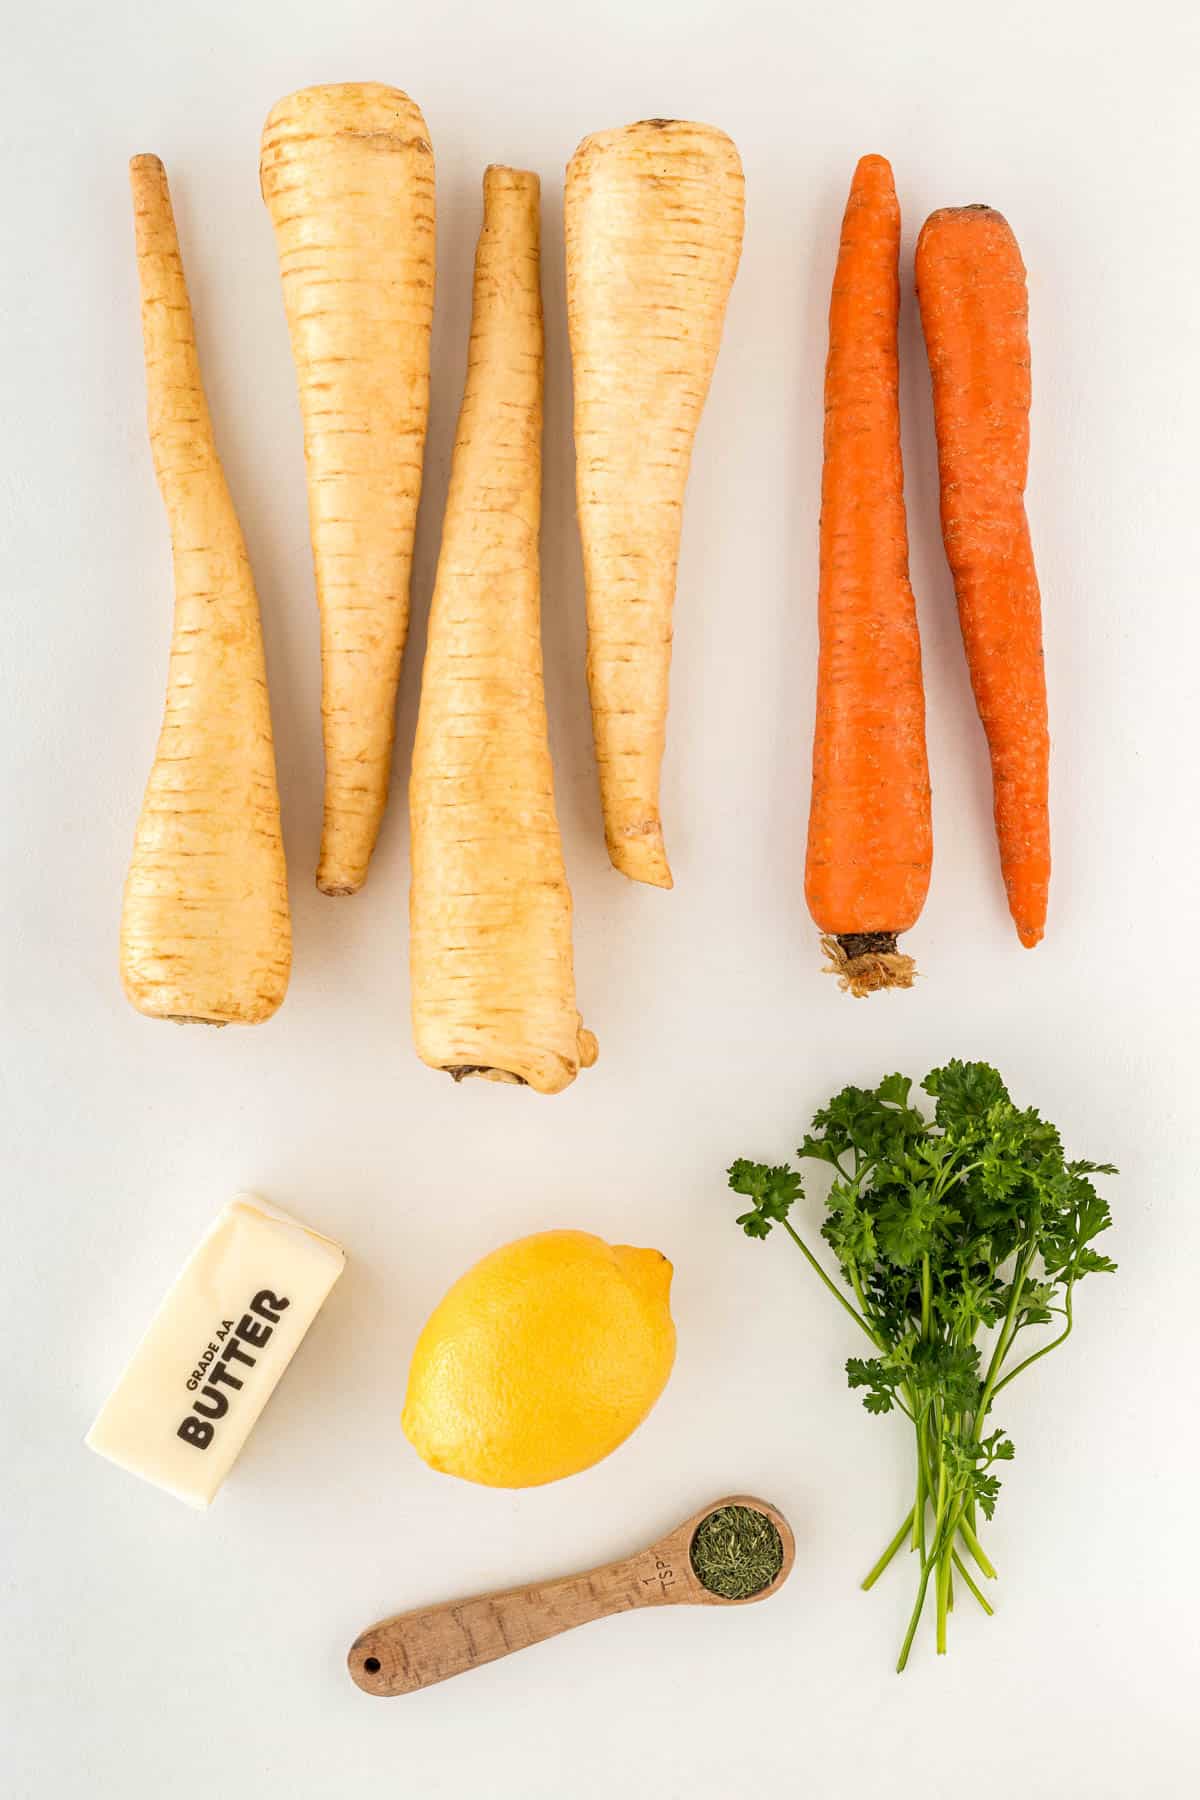 Ingredients for a Carrot and Parsnip recipe. 